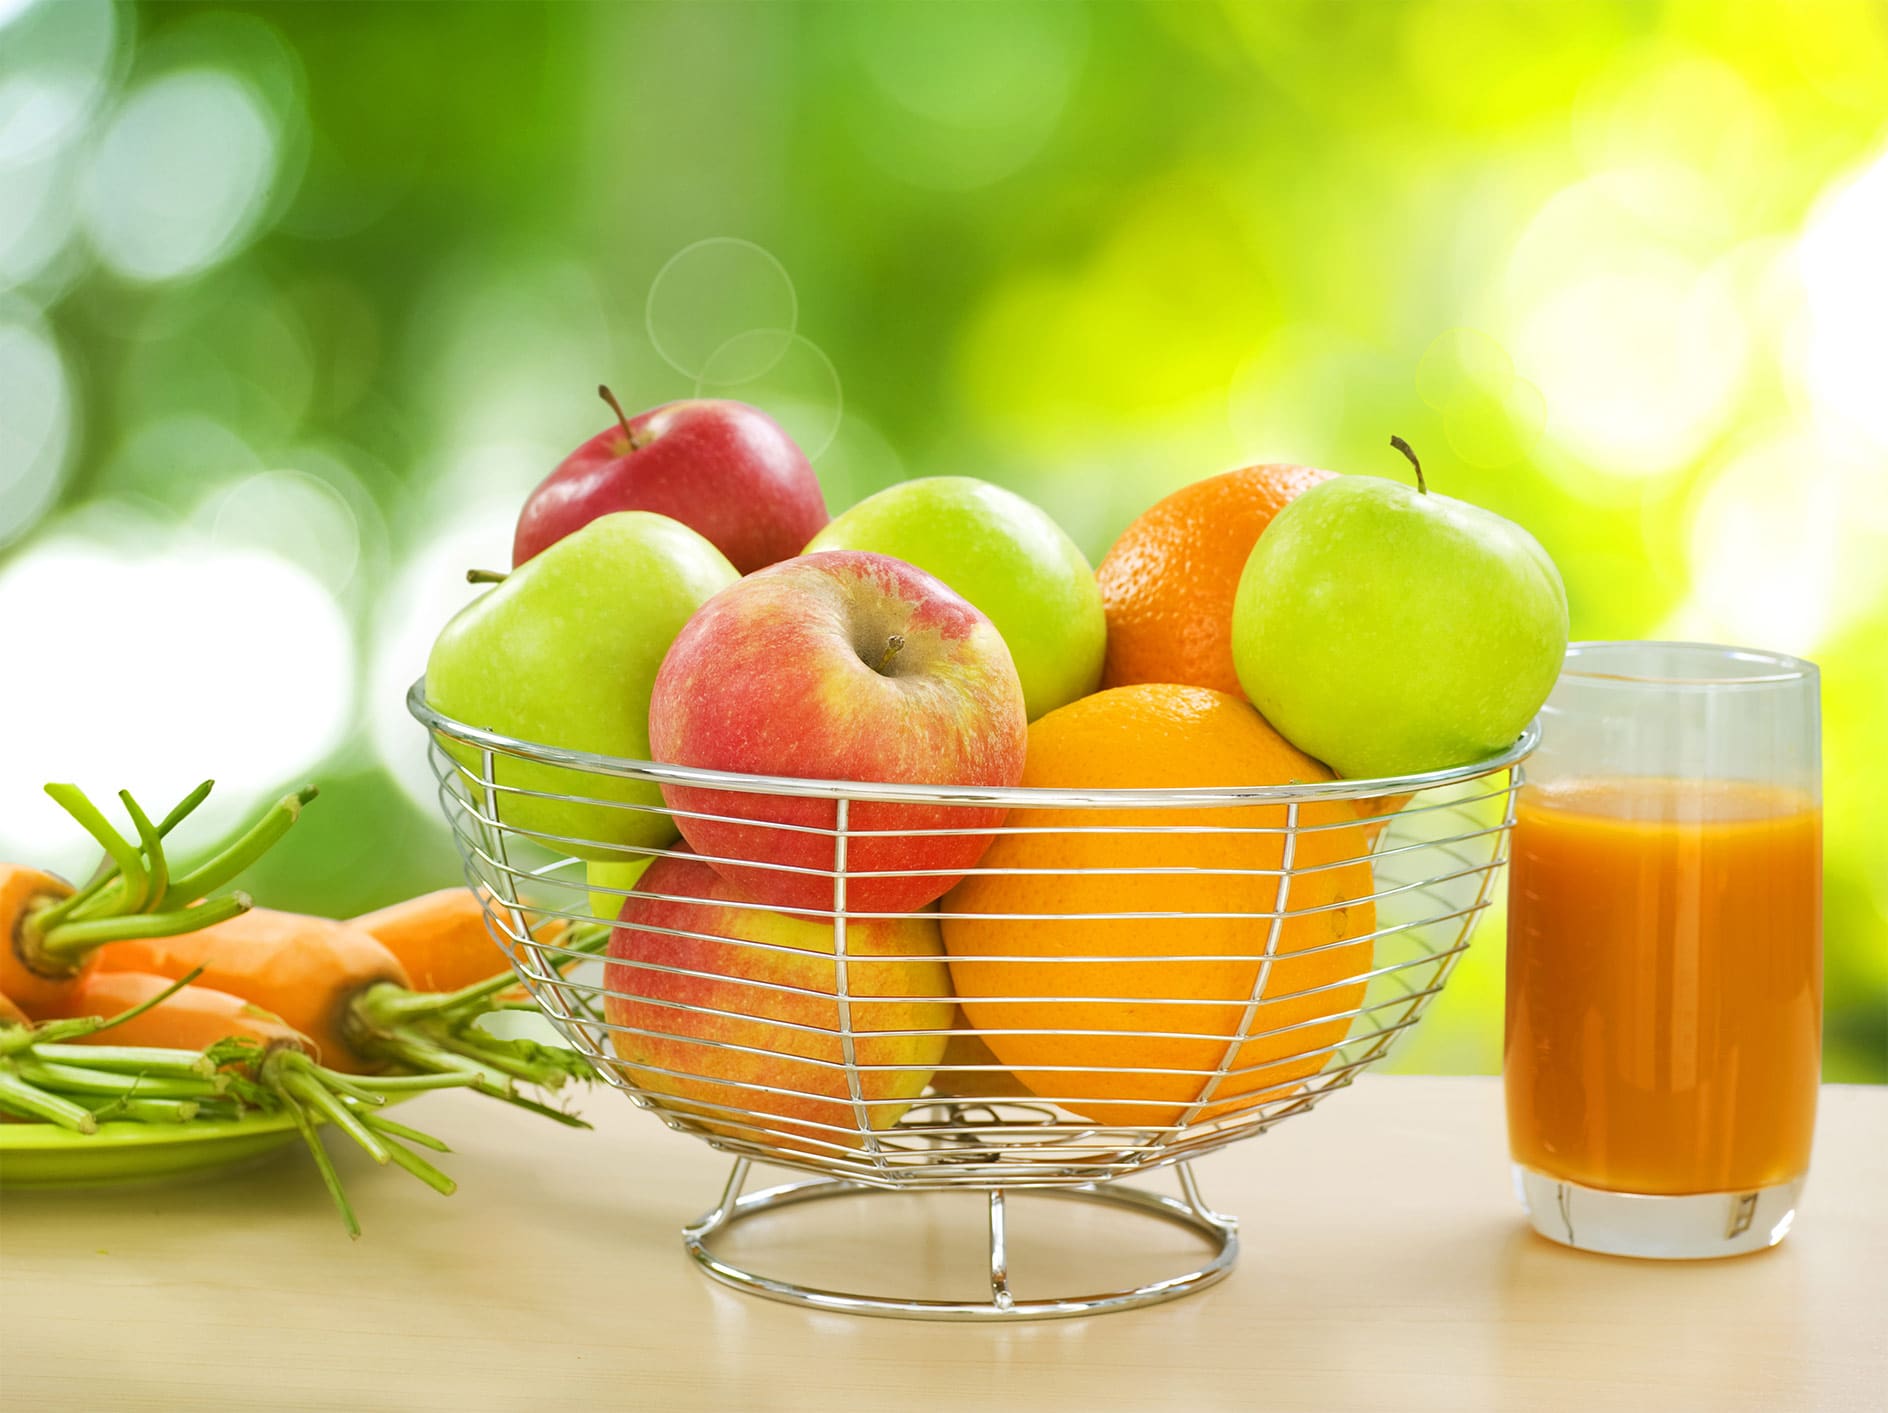 Important Facts About Juicing for Nutrition